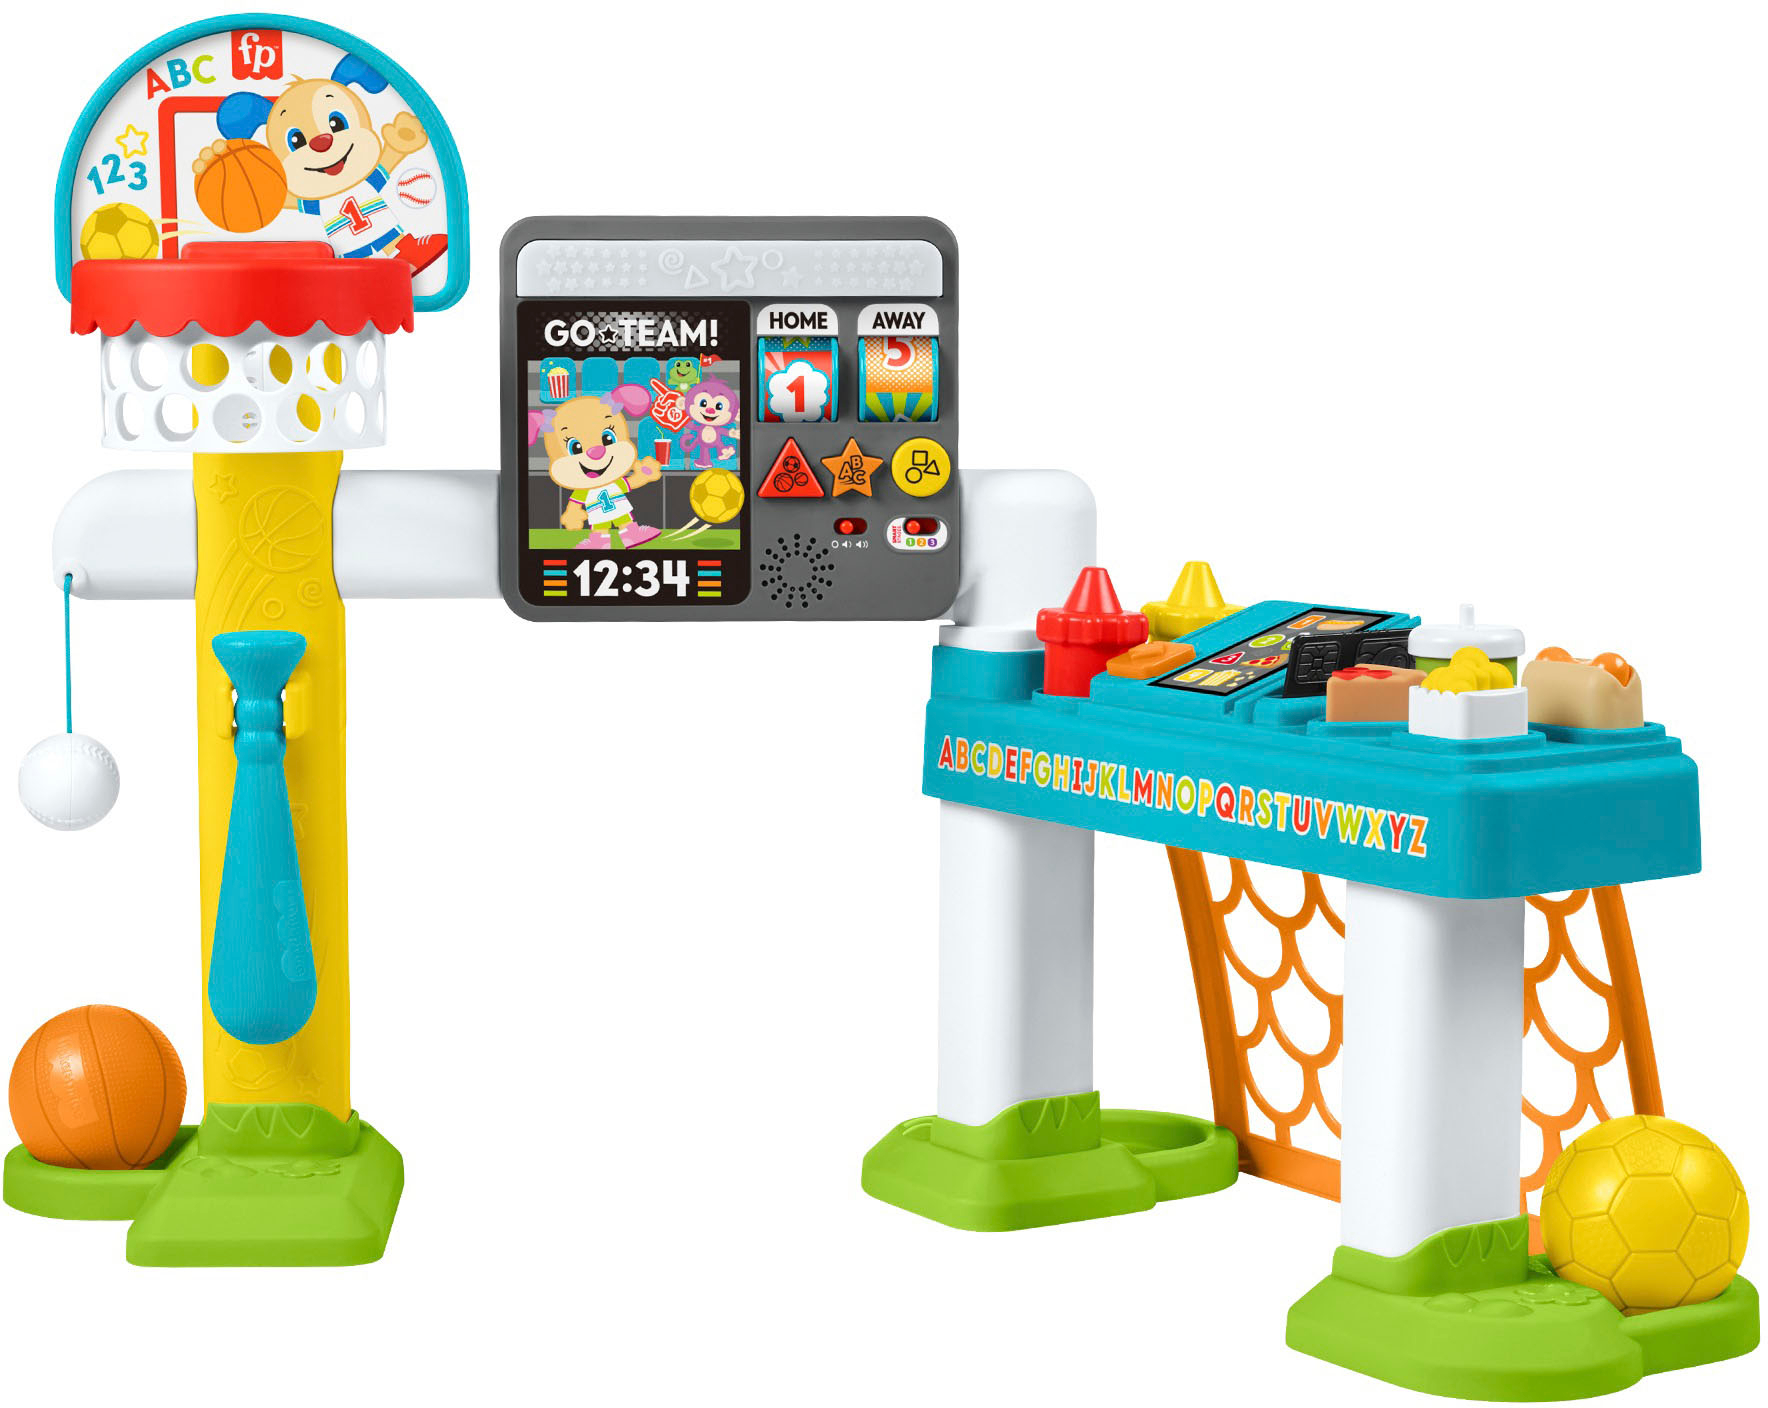 Laugh & Learn 4-in-1 Game Experience Sports Playset